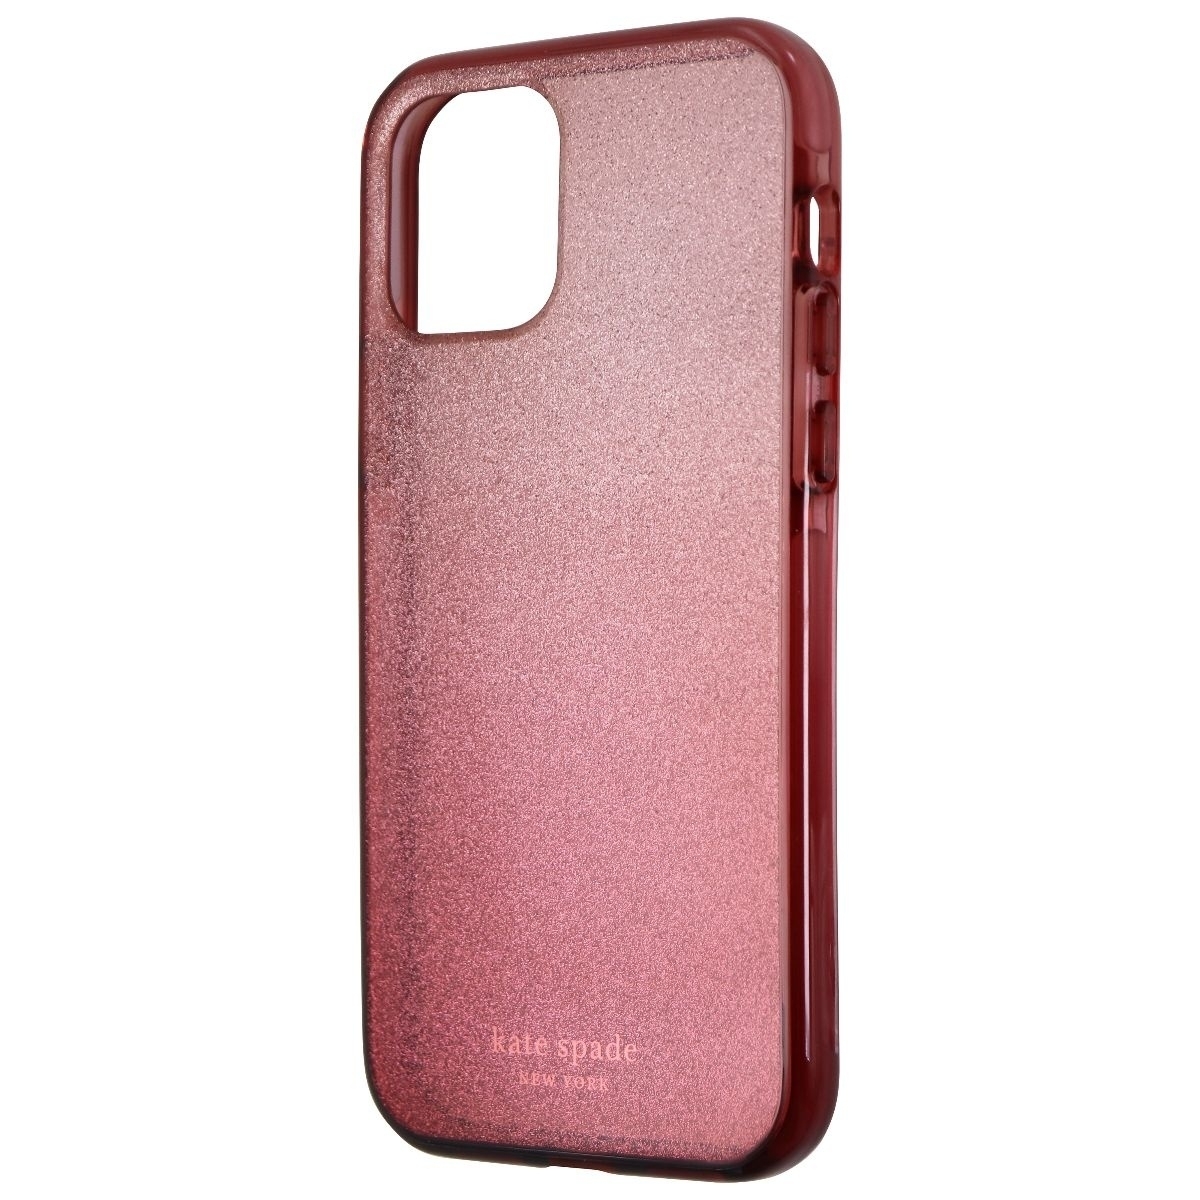 Kate Spade Defensive Case For Apple IPhone 12 Pro & IPhone 12 - Glitter Magenta